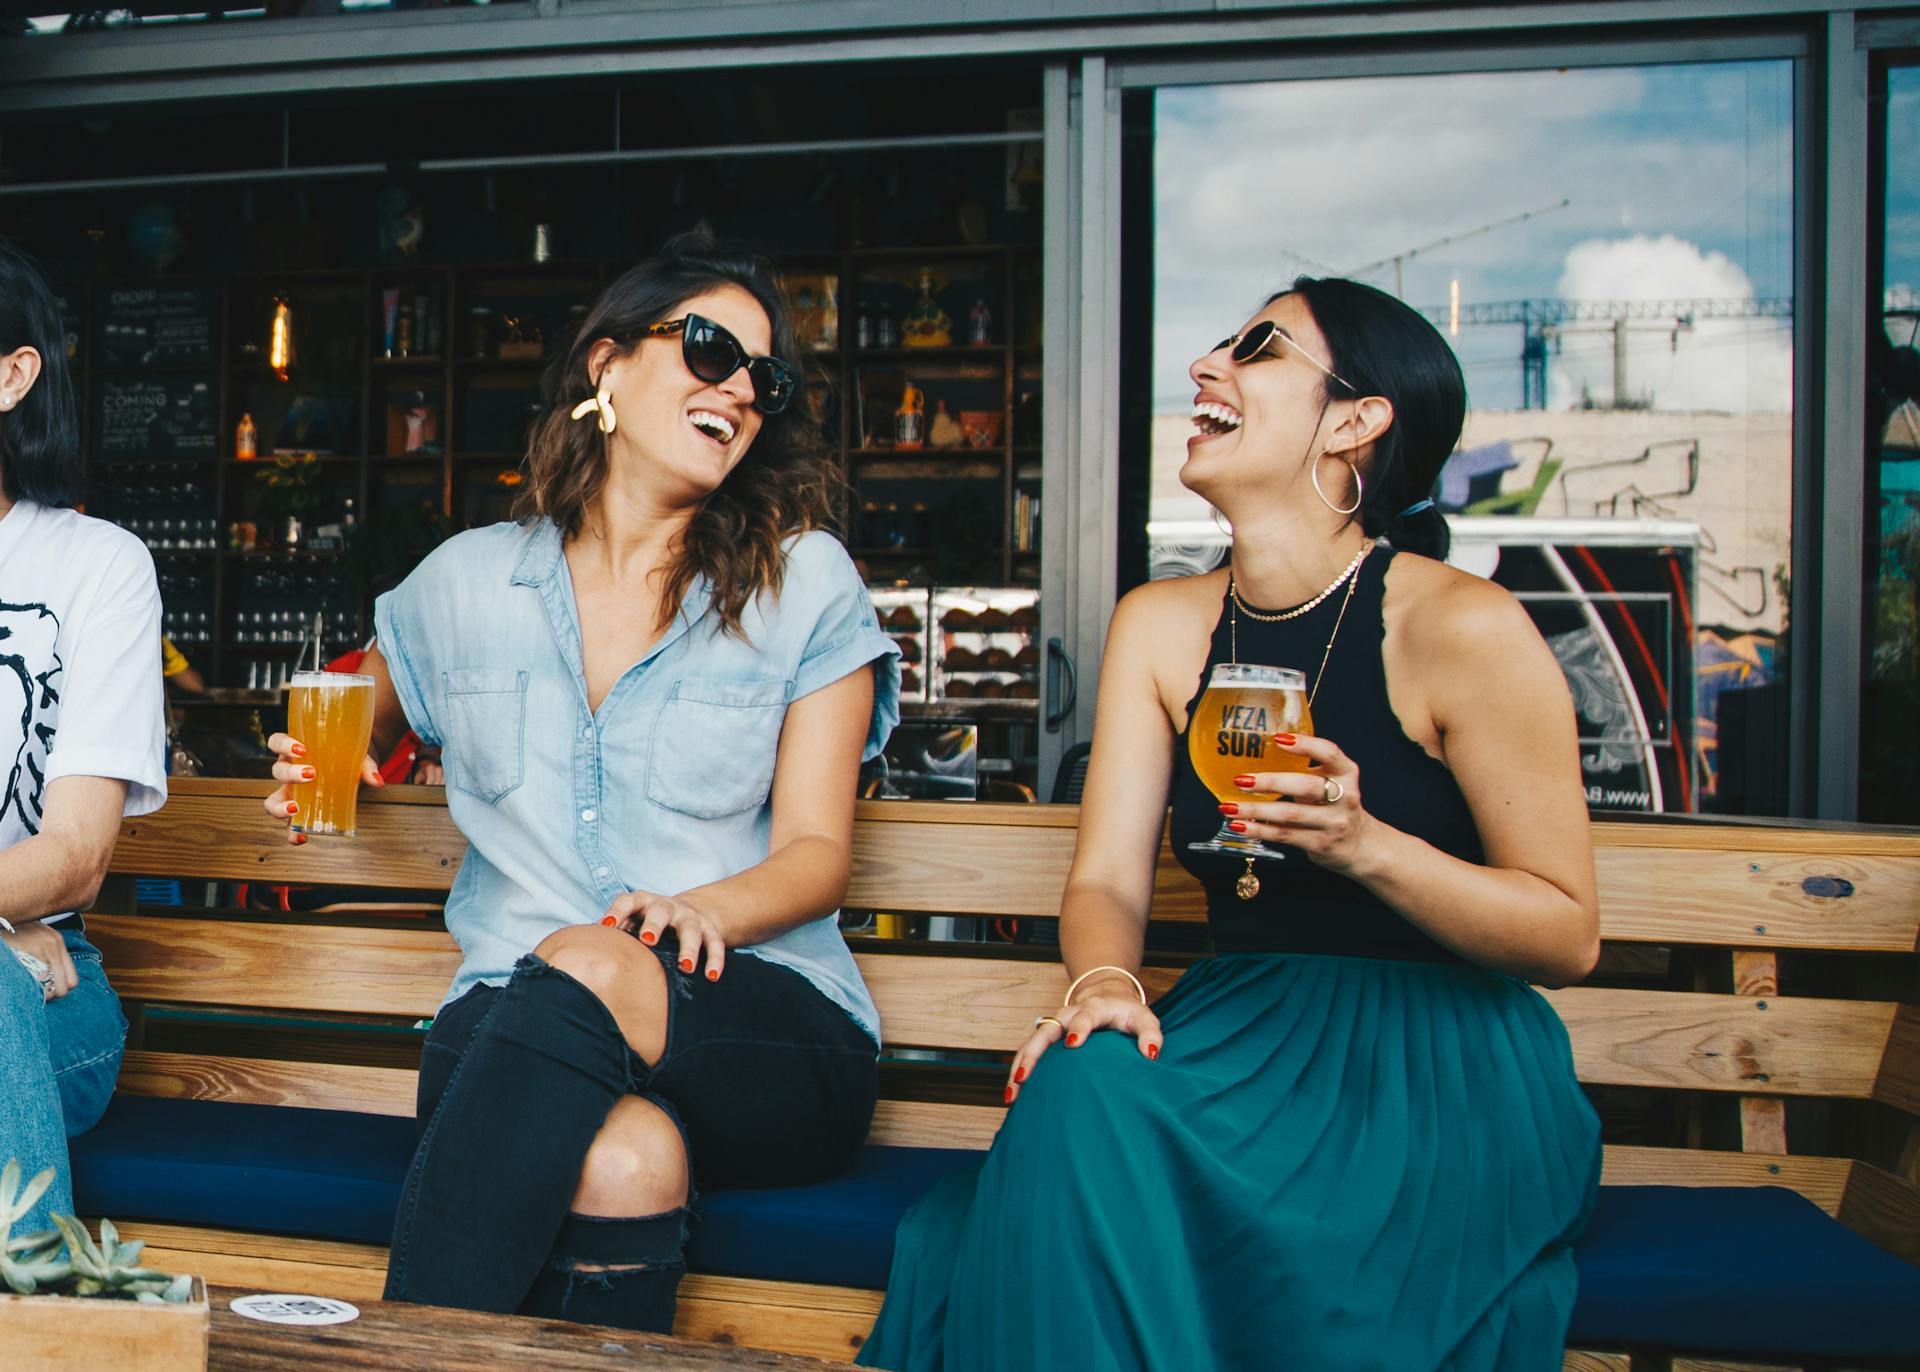 Women sitting together and laughing | Source: Pexels